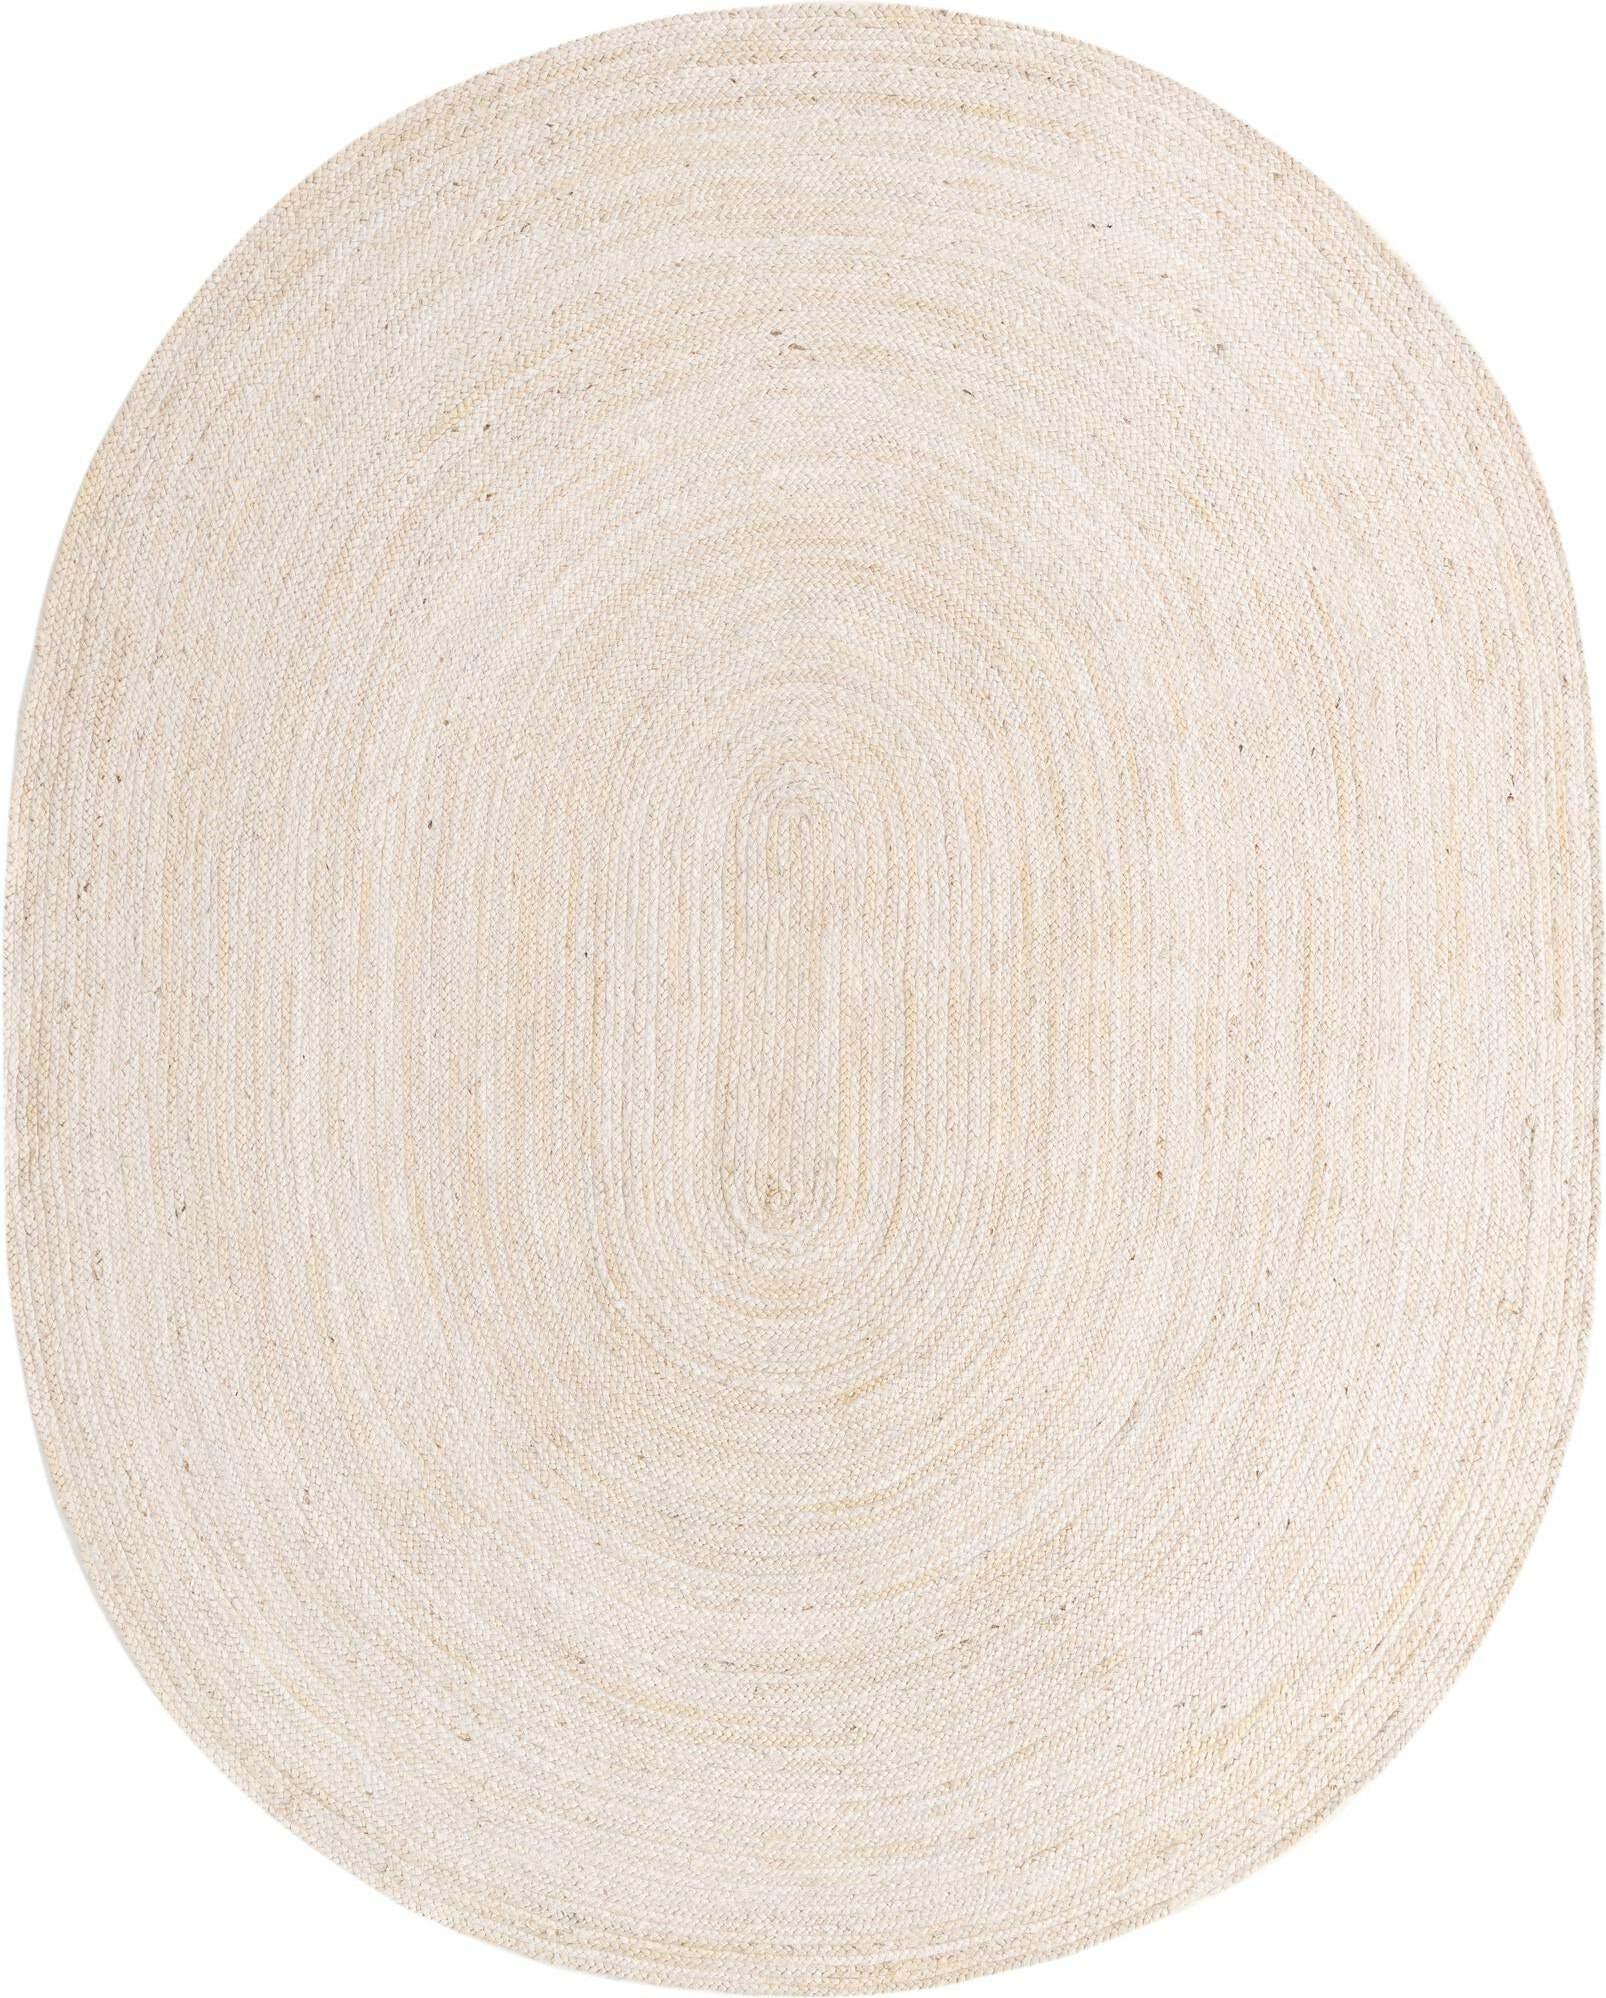 Shop Braided Jute Solid Oval 8x10 Oval Rug Beige & Natural